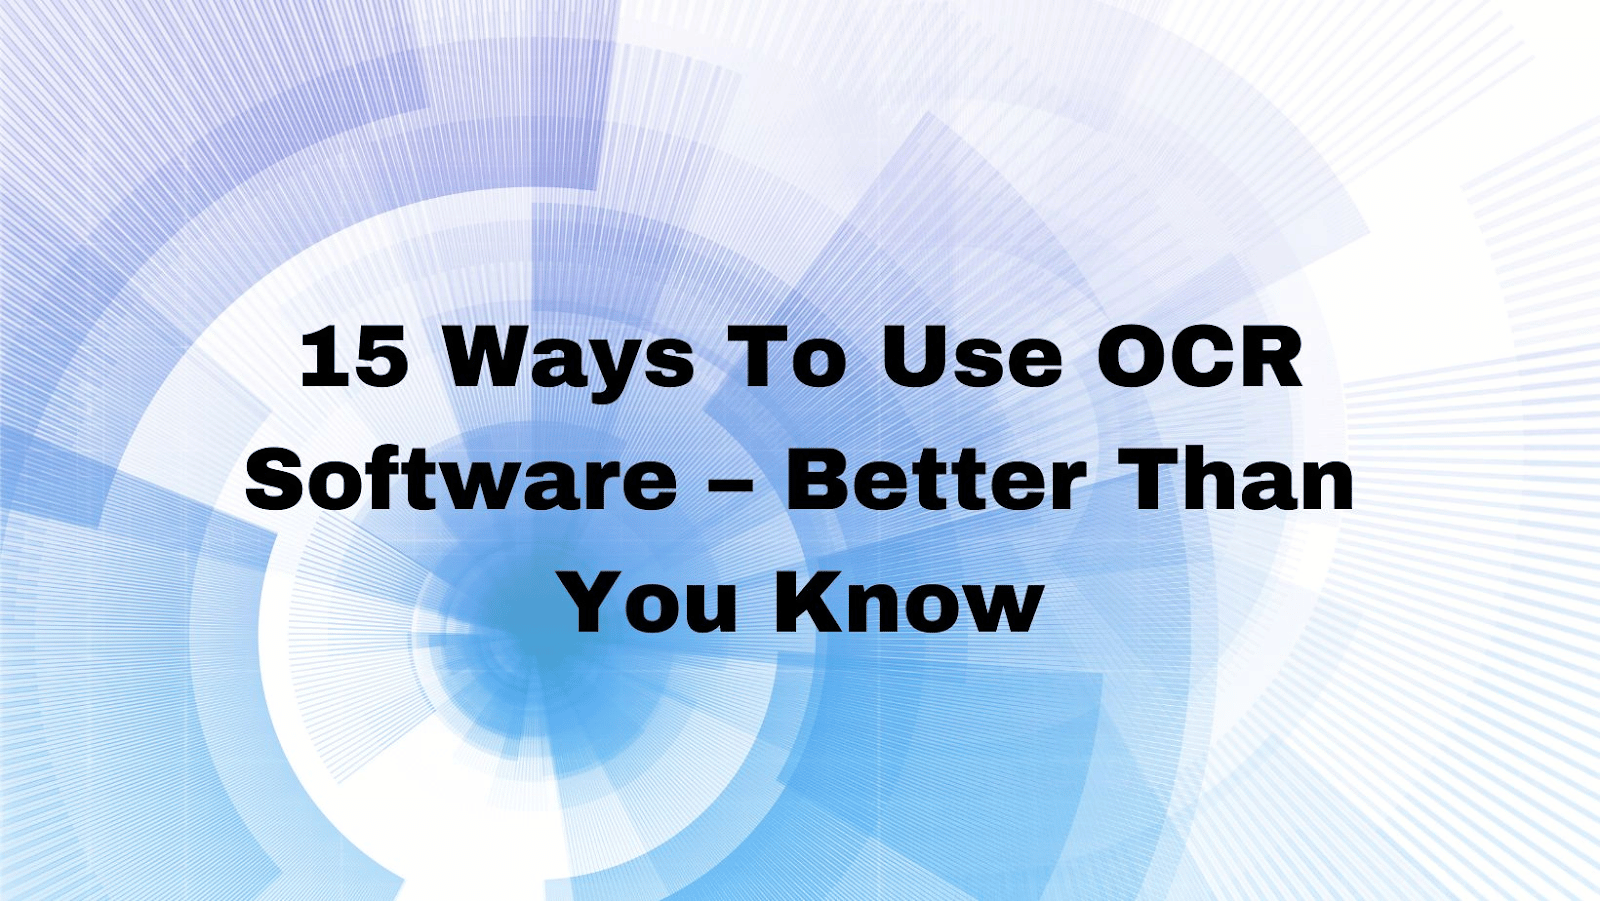 15 Ways To Use OCR Software